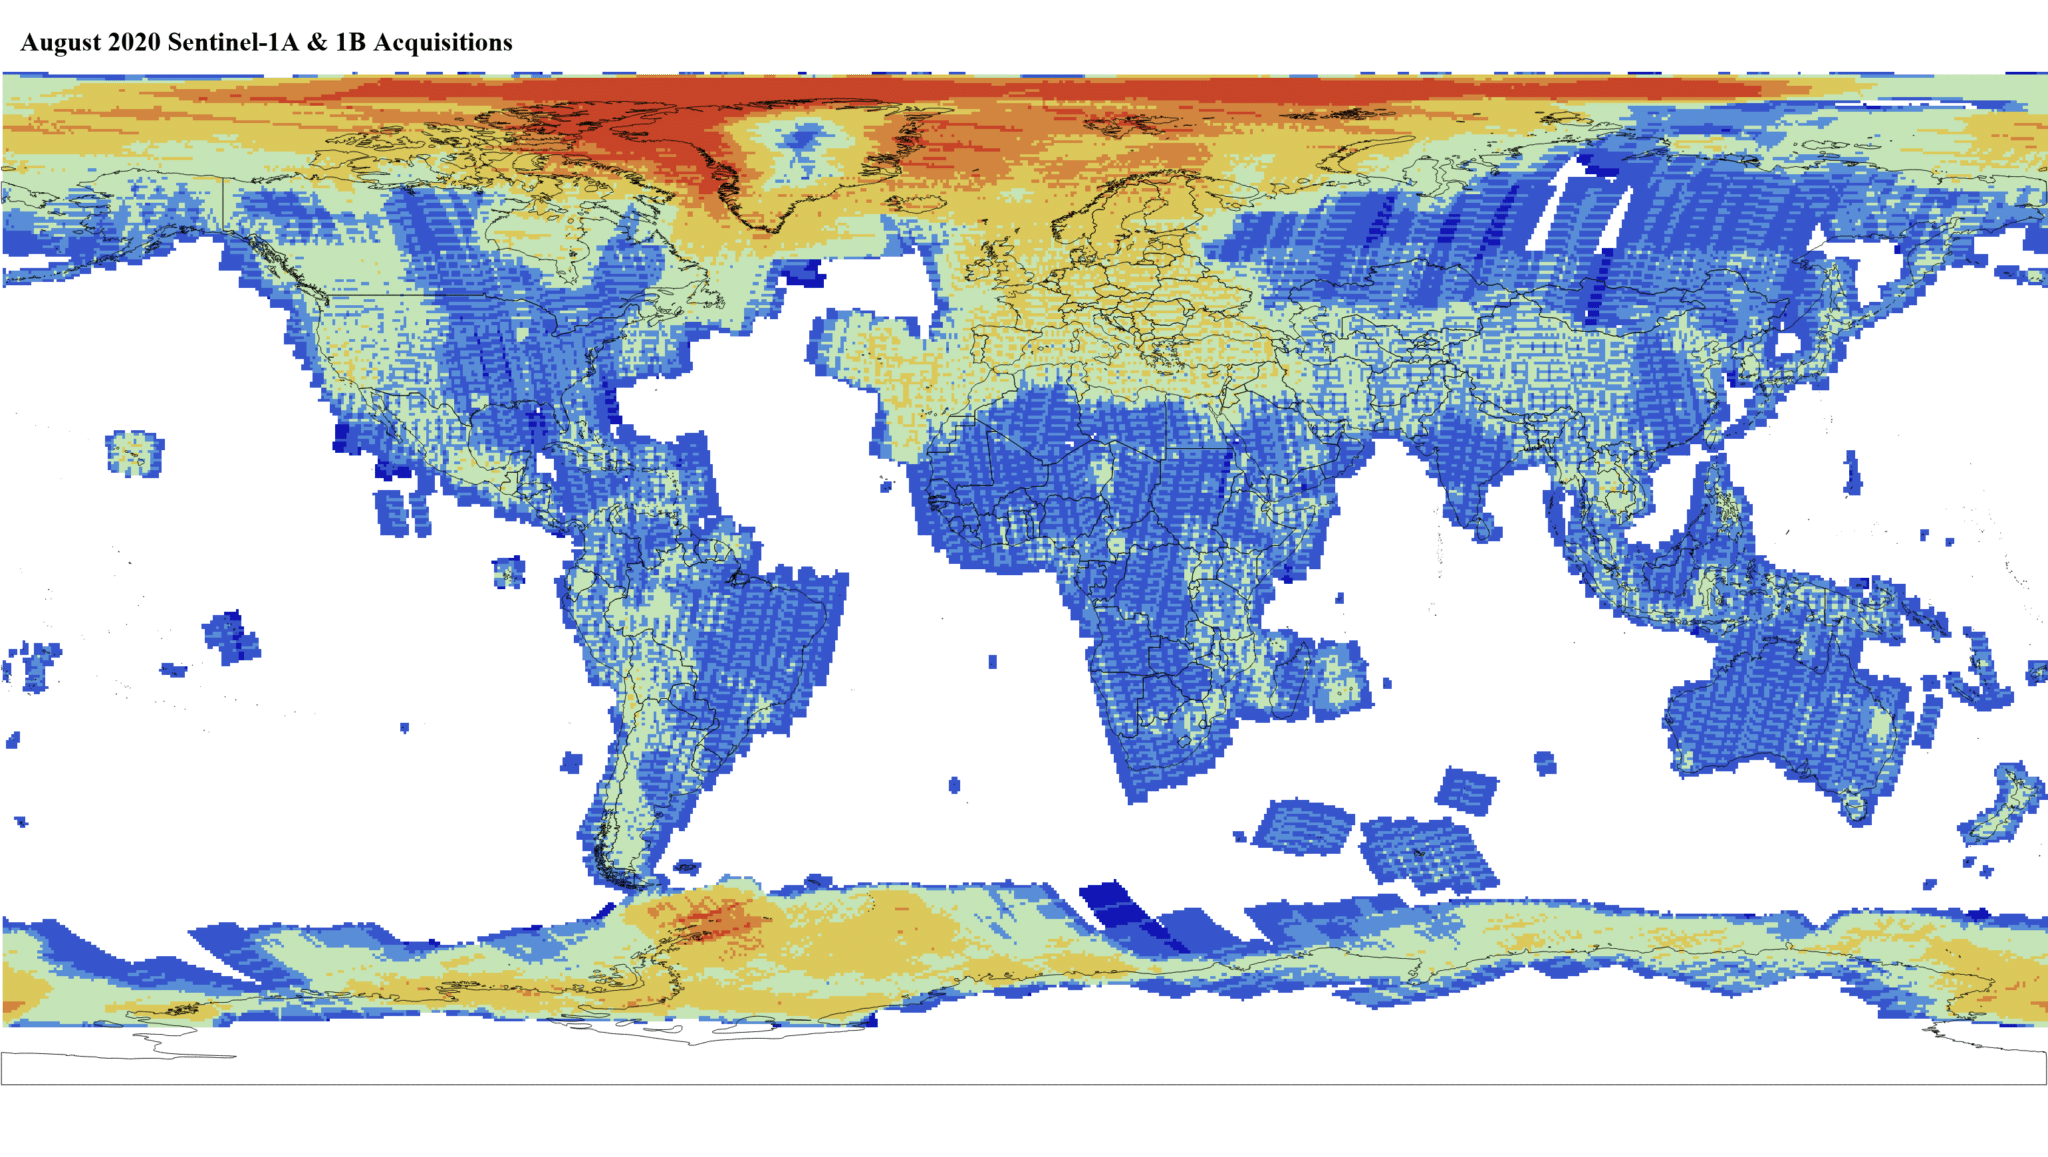 Heat map of Sentinel-1A and -1B GRD global acquisitions August 2020